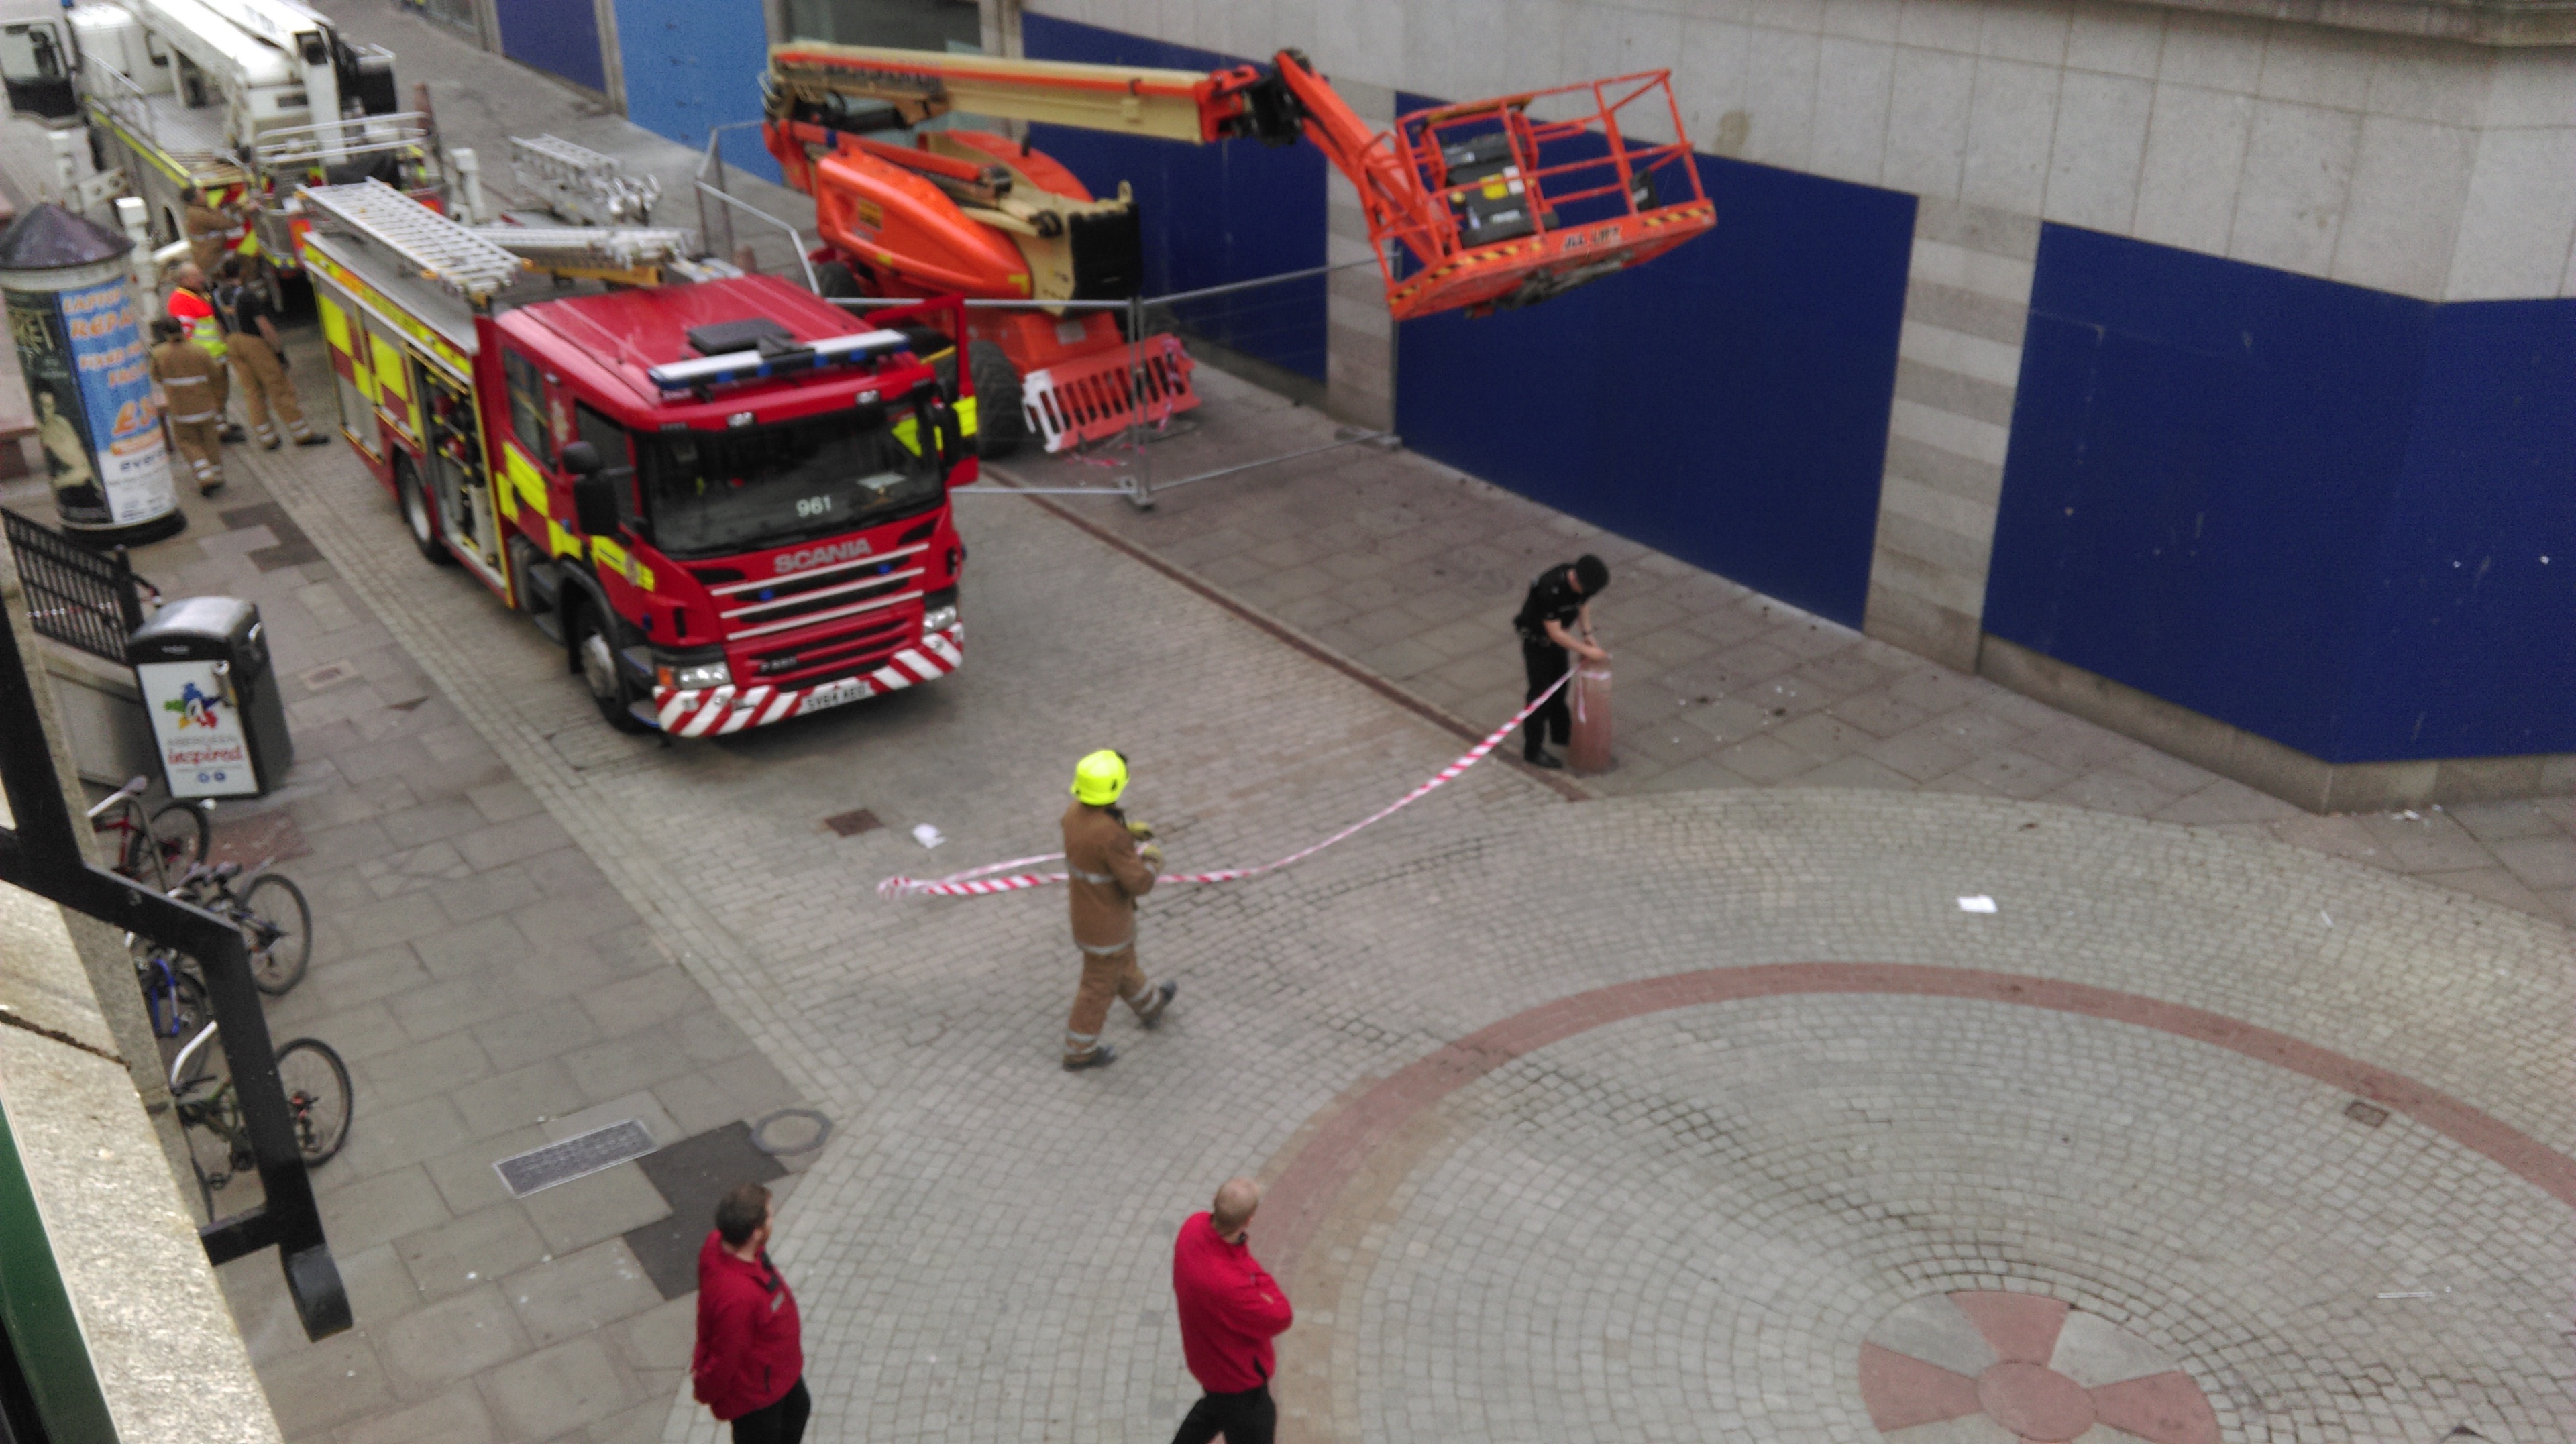 Police sealed off the area while fire crews tackled the blaze 